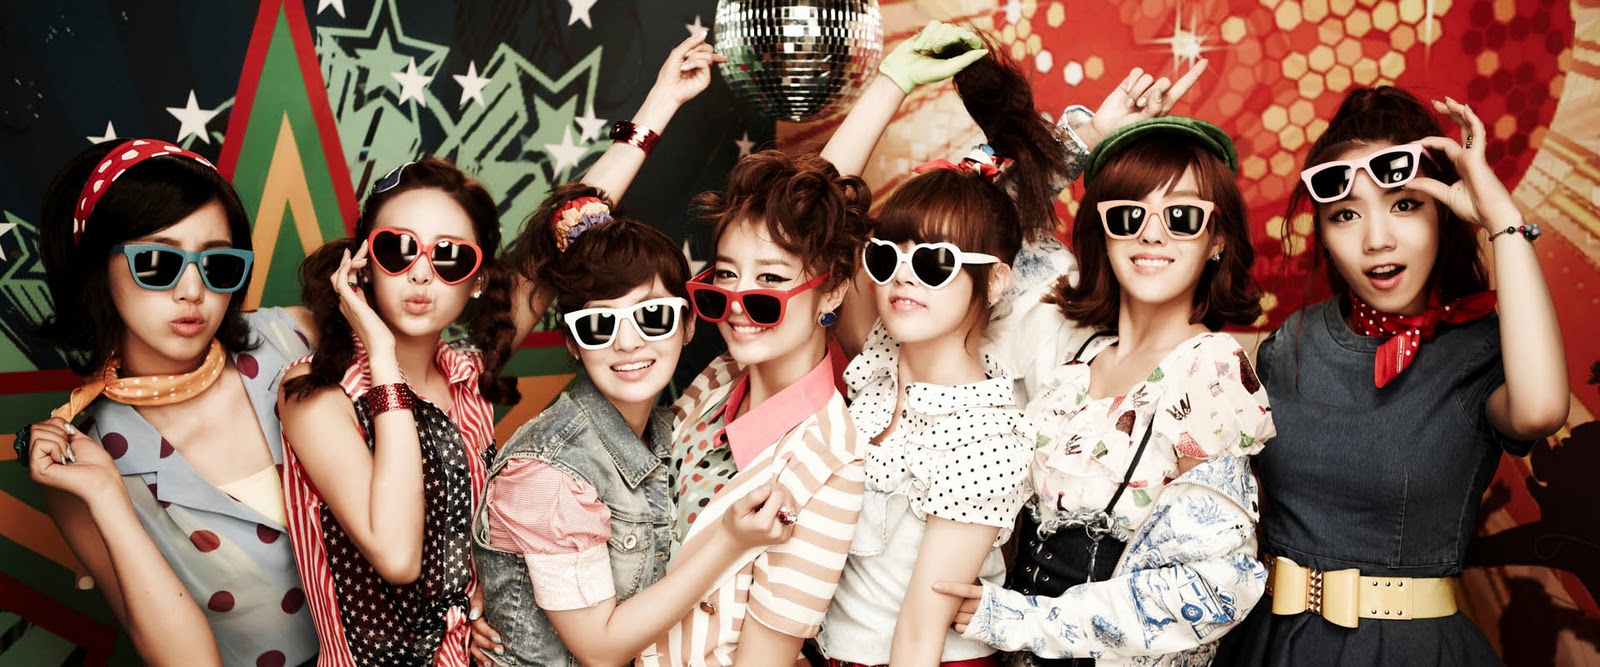 T-ara and their colorful Roly Poly Wallpapers ~ T-ara World ~ 티아라